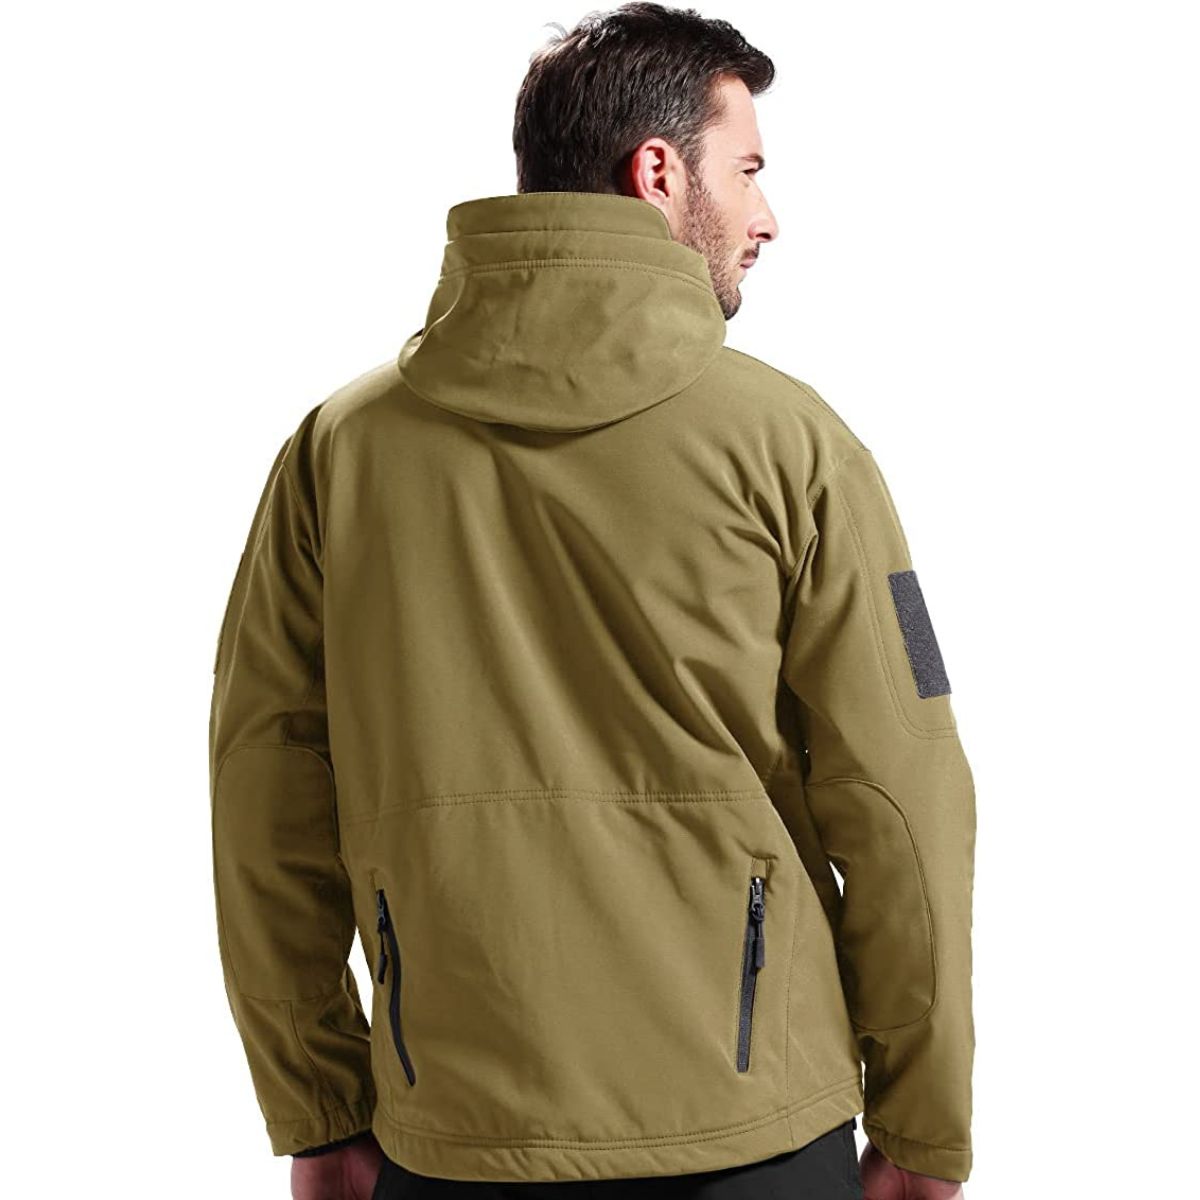 jacket for camping and backpacking